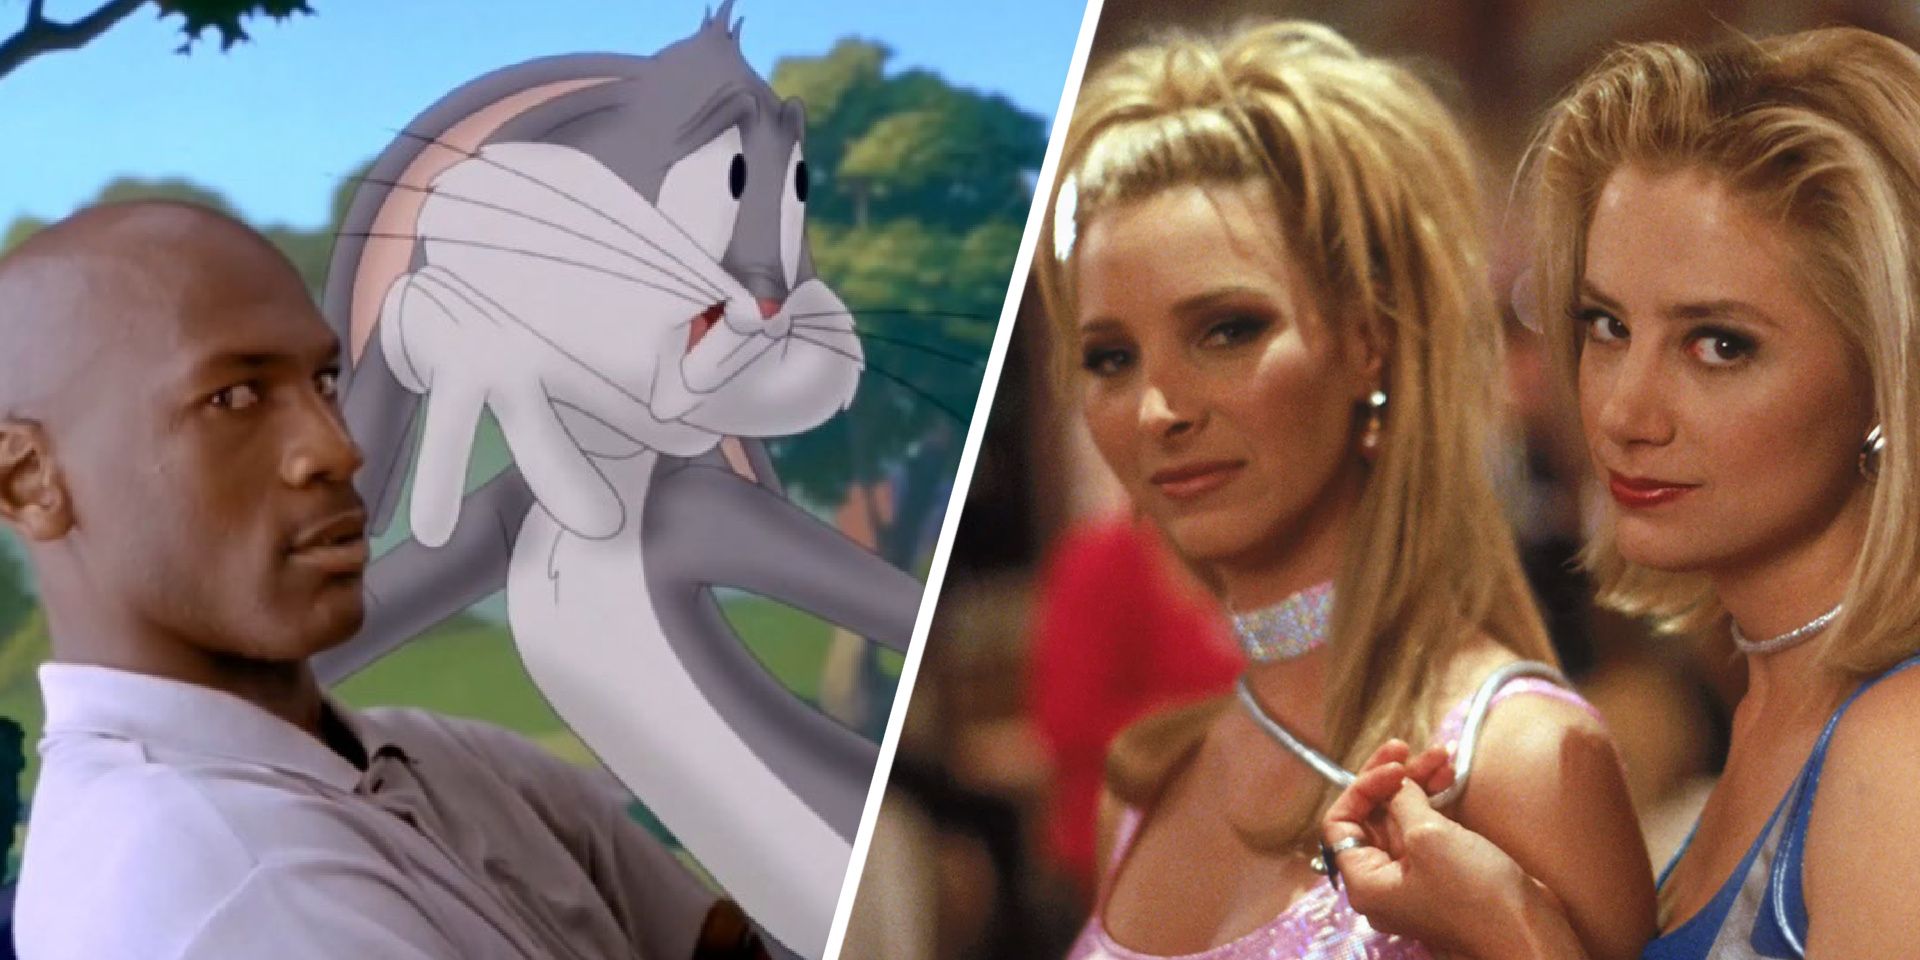 Space Jam and Romy & Michele's High School Reunion - Terrible '90s movies that fans grew to love